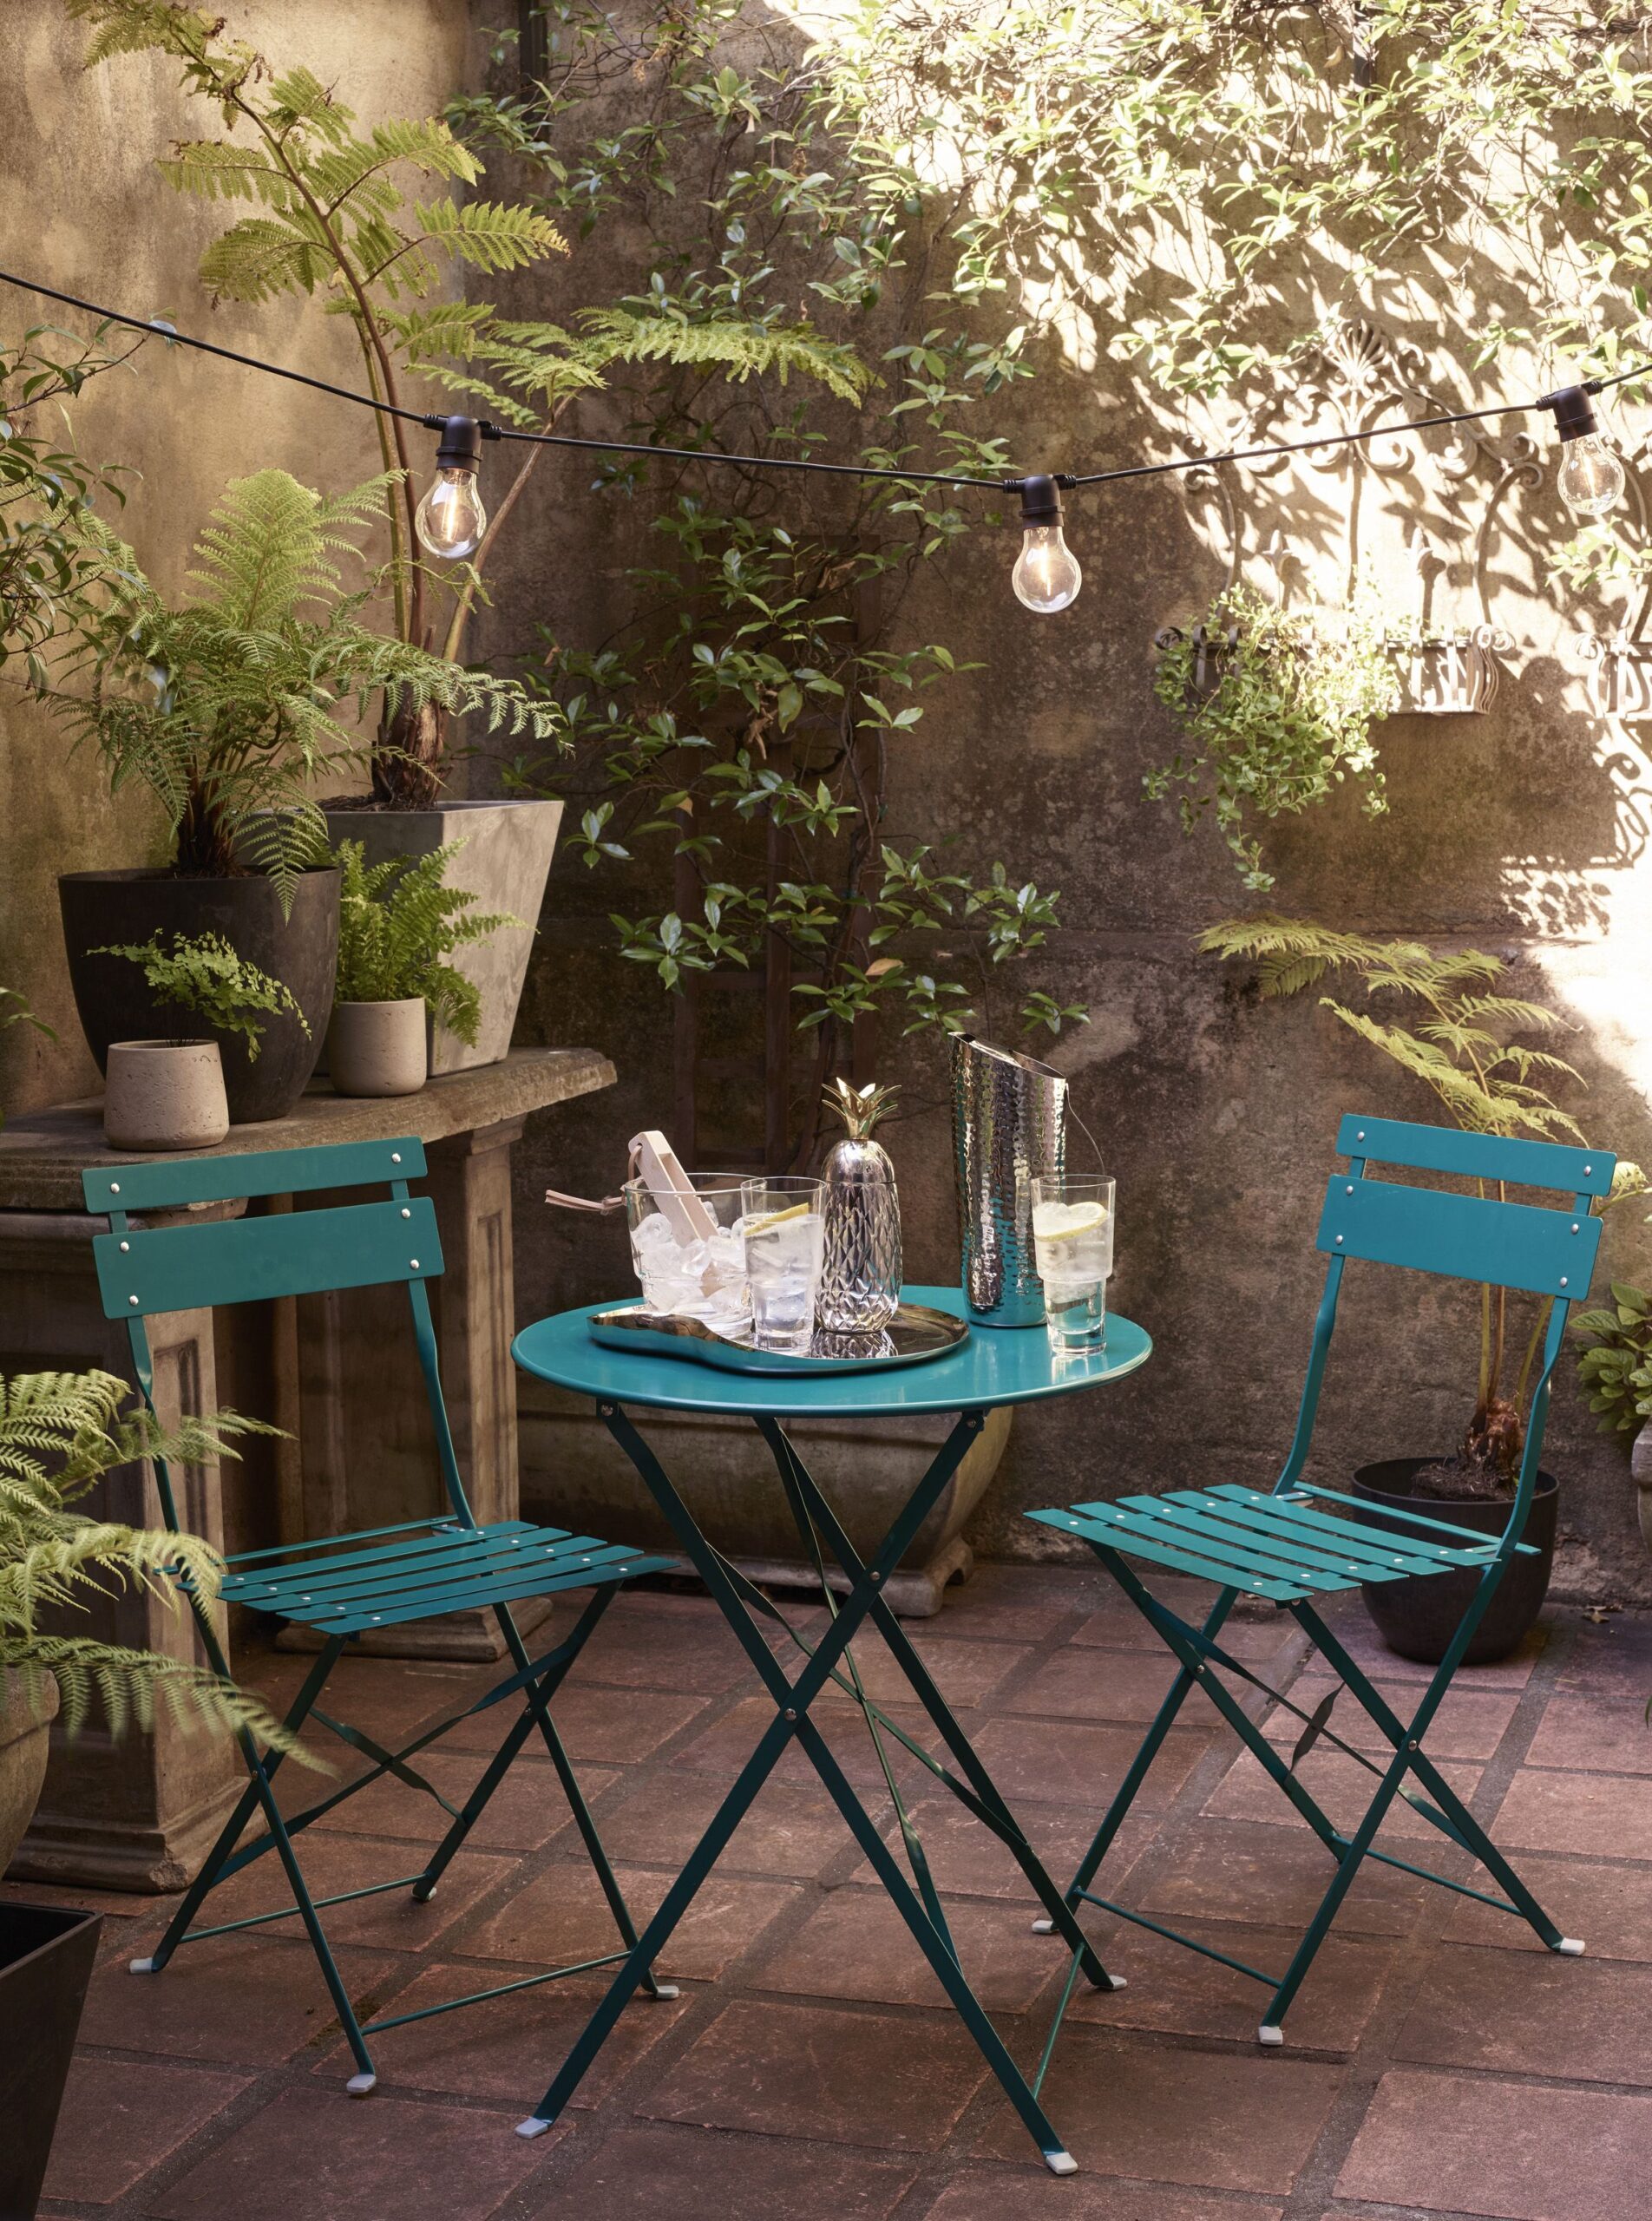 Compact Outdoor Dining: The Charm of Small Garden Tables